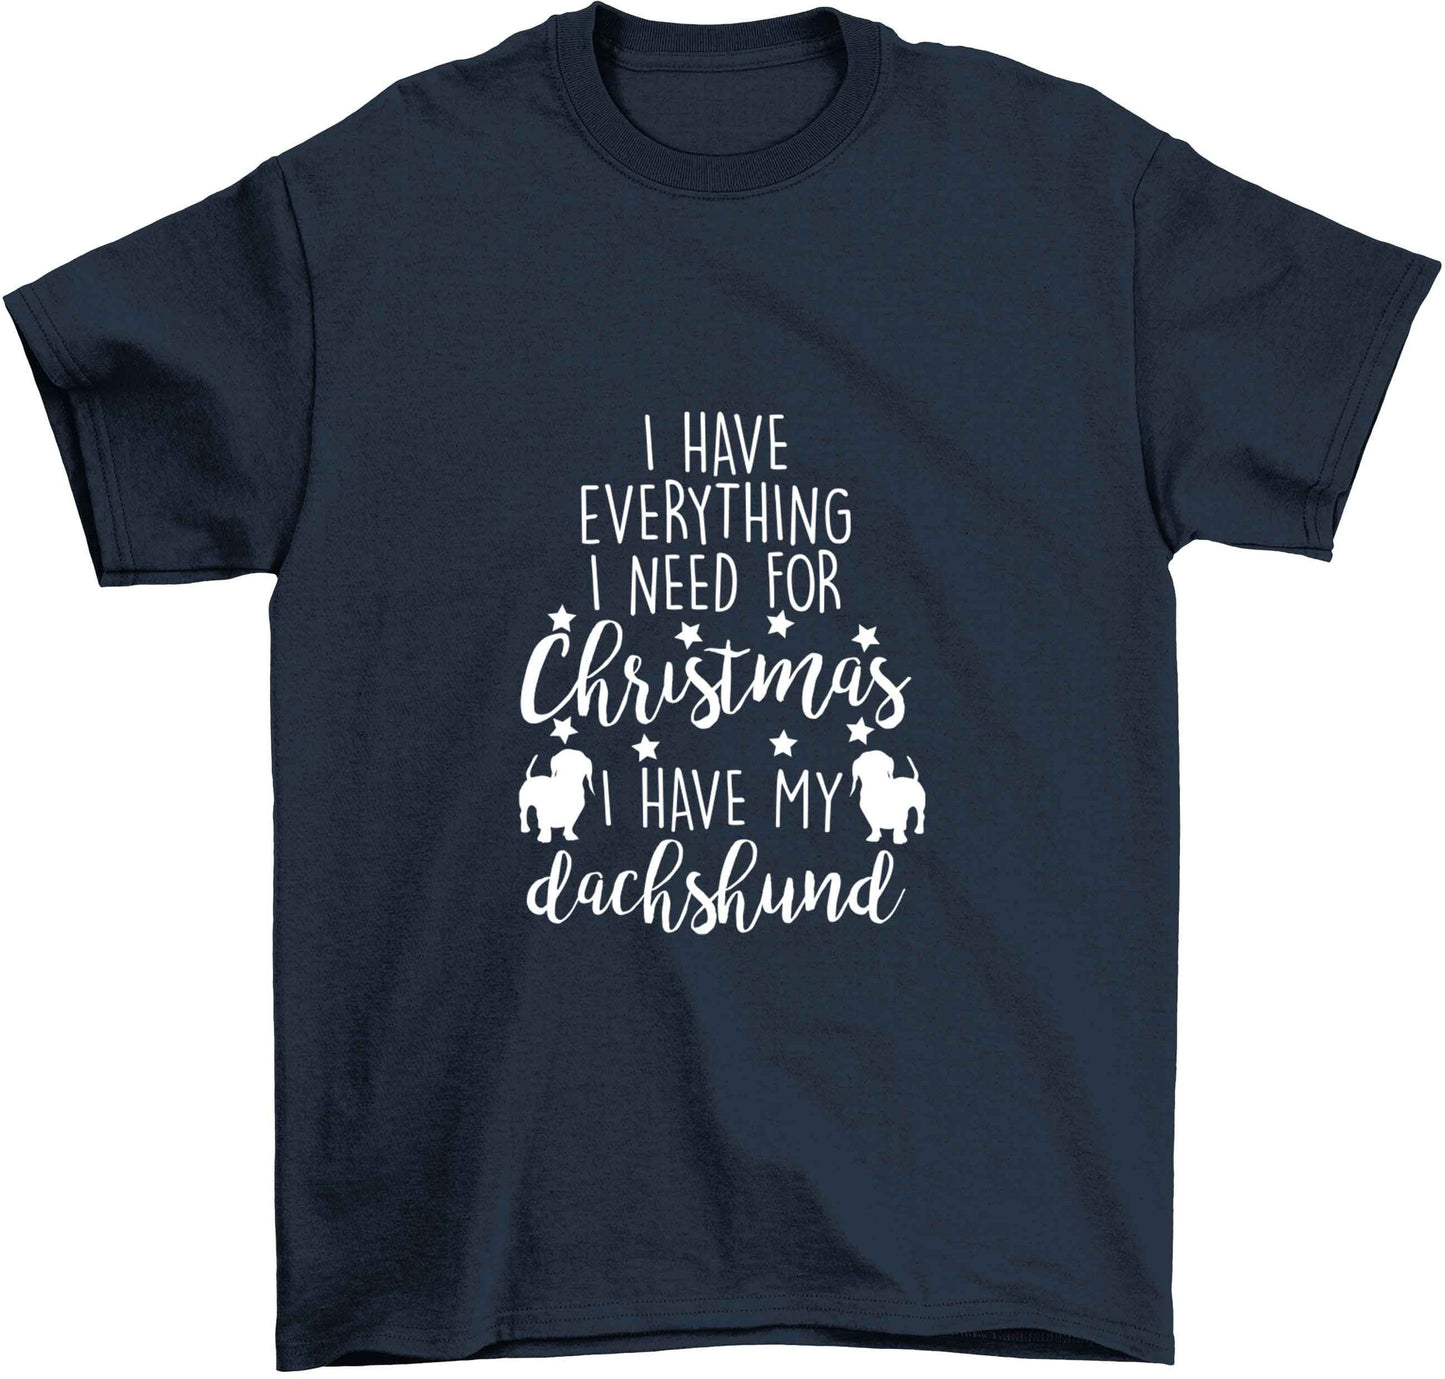 I have everything I need for Christmas I have my dachshund Children's navy Tshirt 12-13 Years